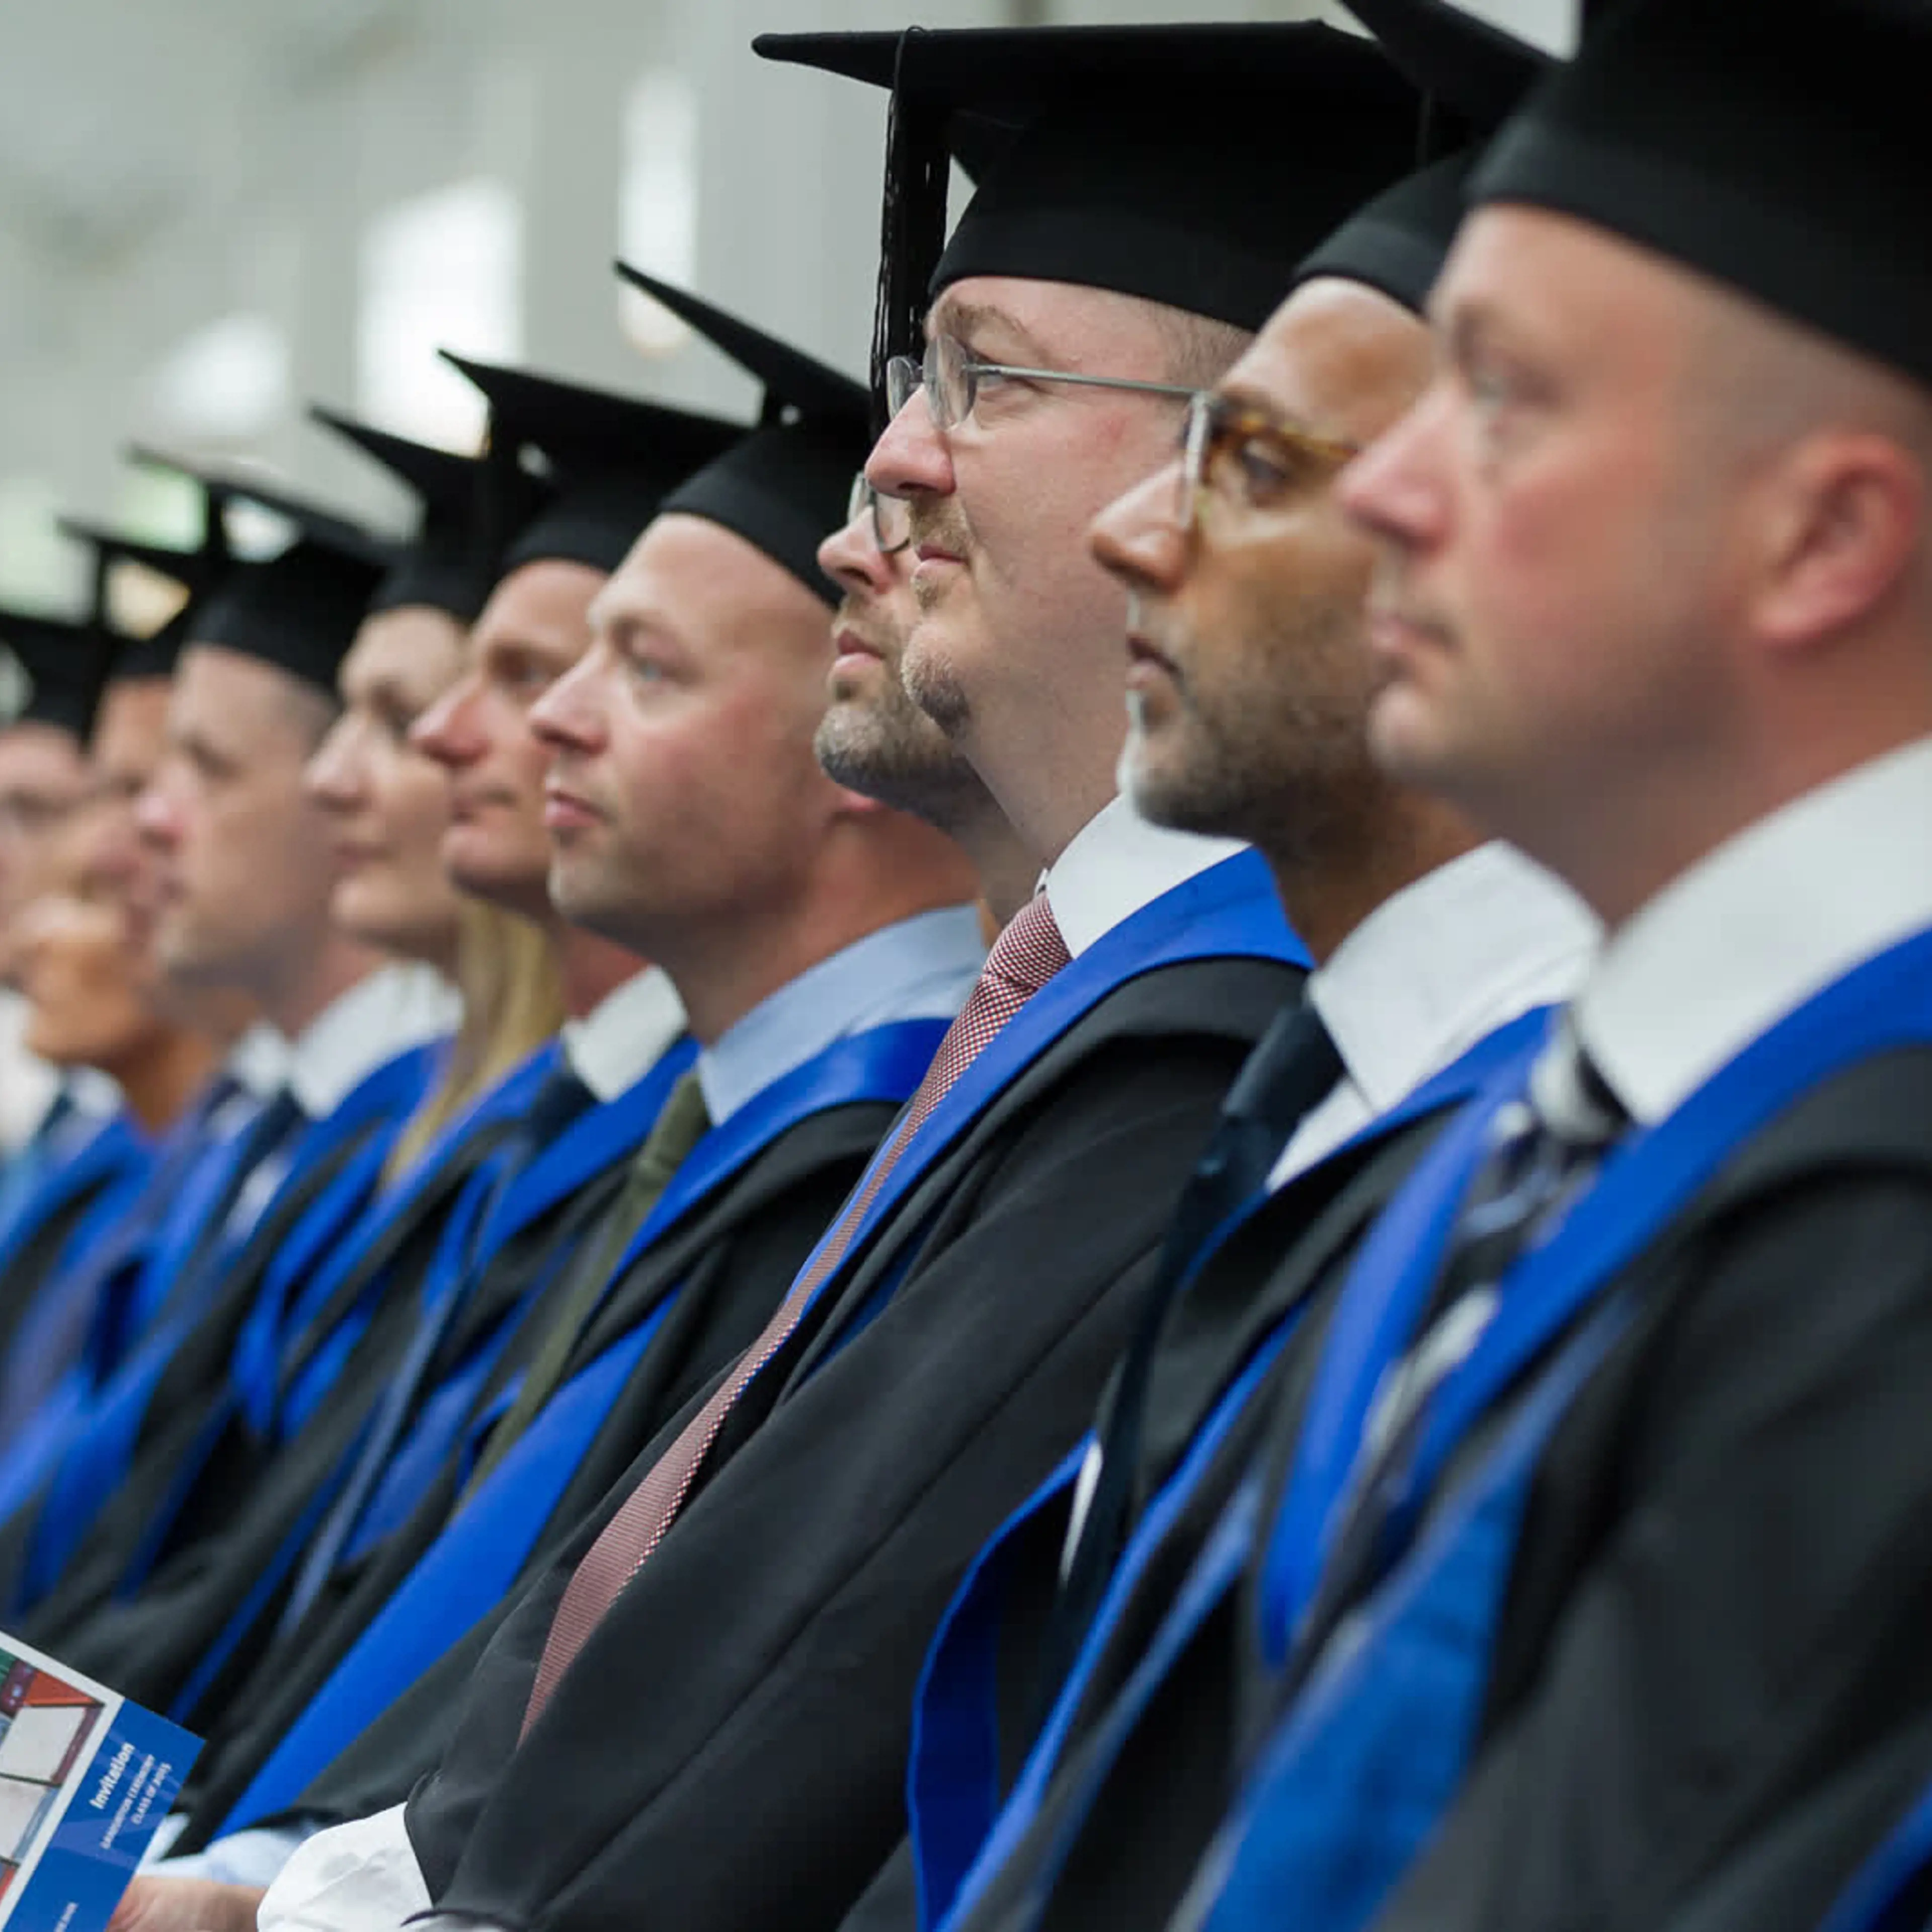 Blue MBA participants sitting in their robes on graduation day